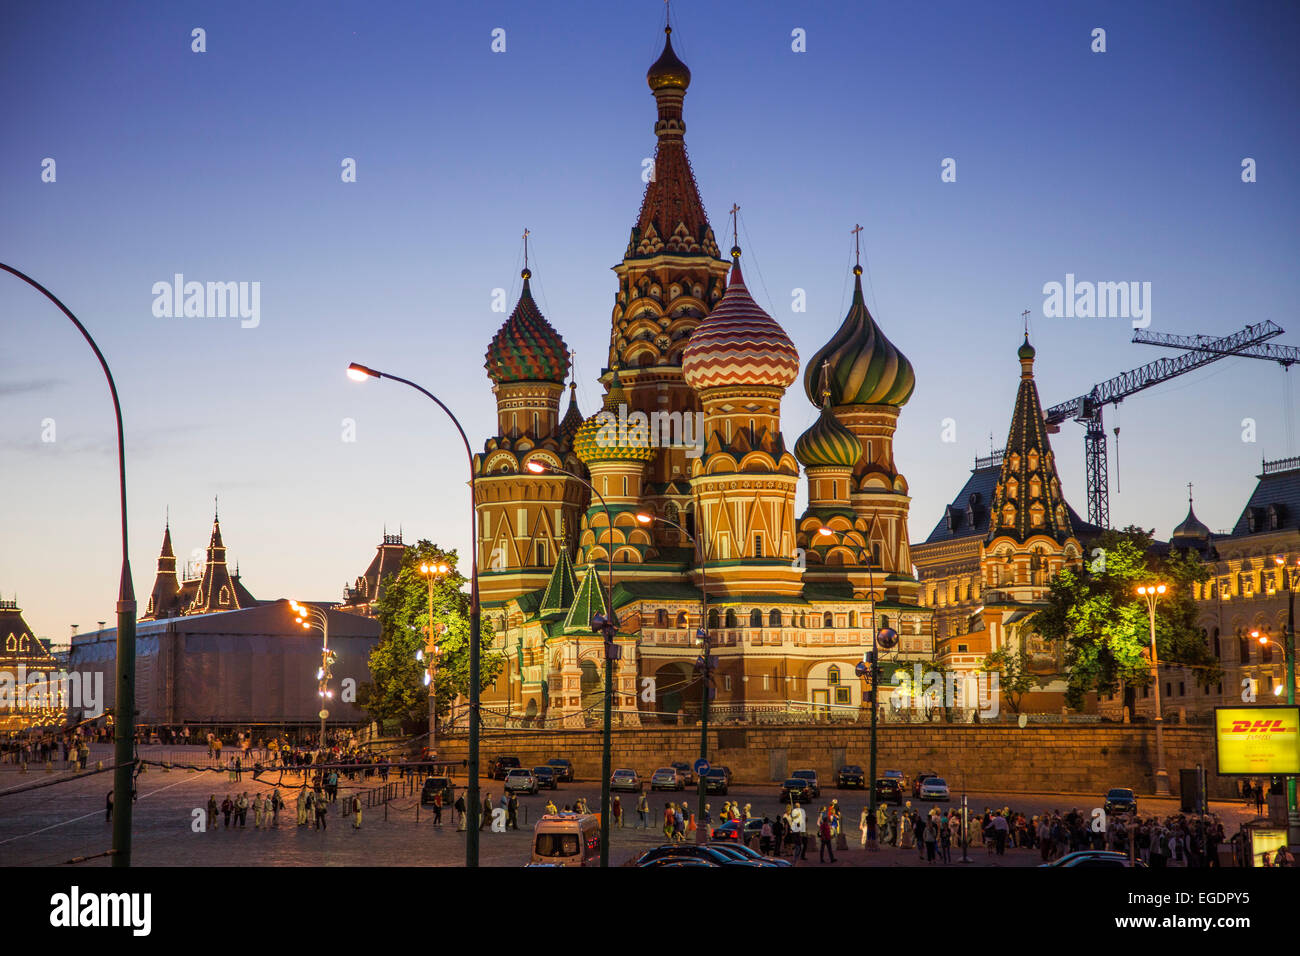 St. Basil's Cathedral on Red Square at dusk, Moscow, Russia, Europe Stock Photo